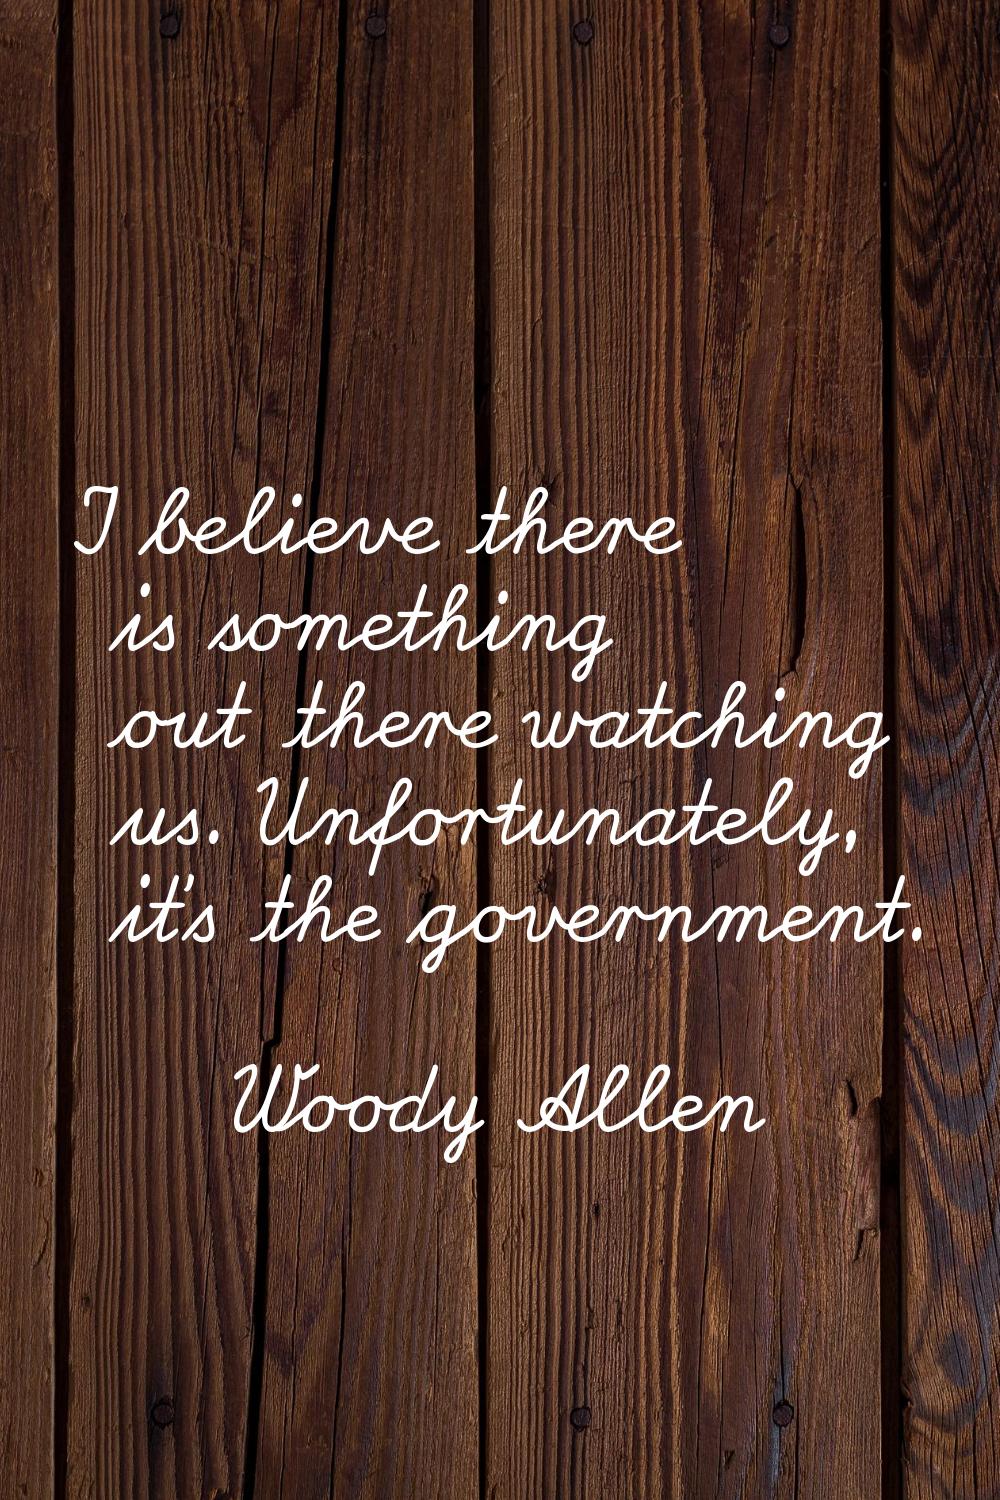 I believe there is something out there watching us. Unfortunately, it's the government.